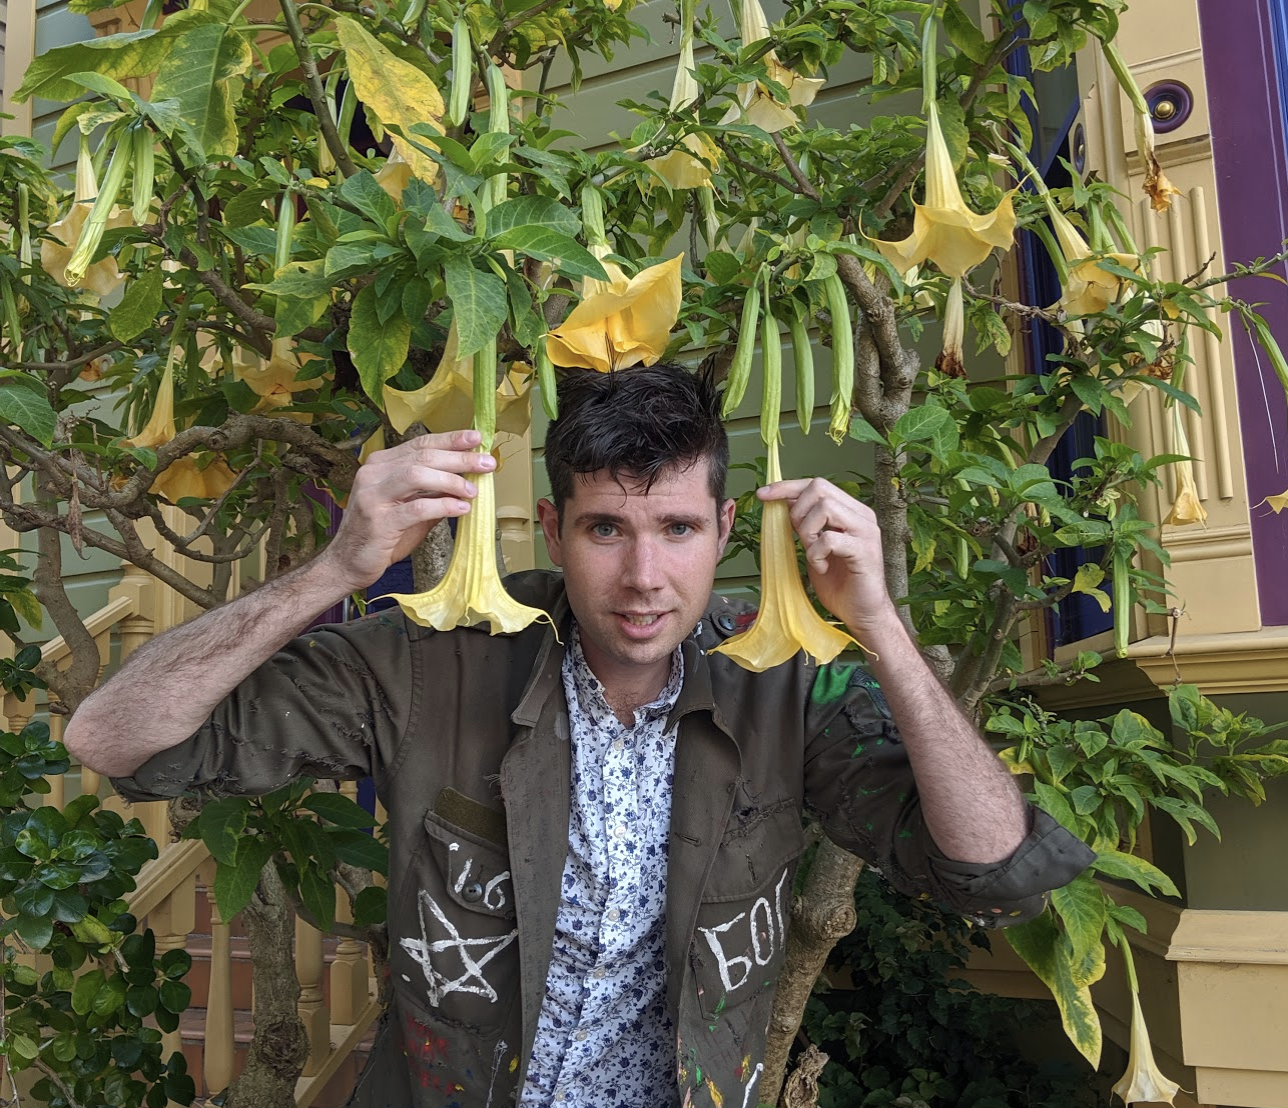 a picture of the brugmansia plant